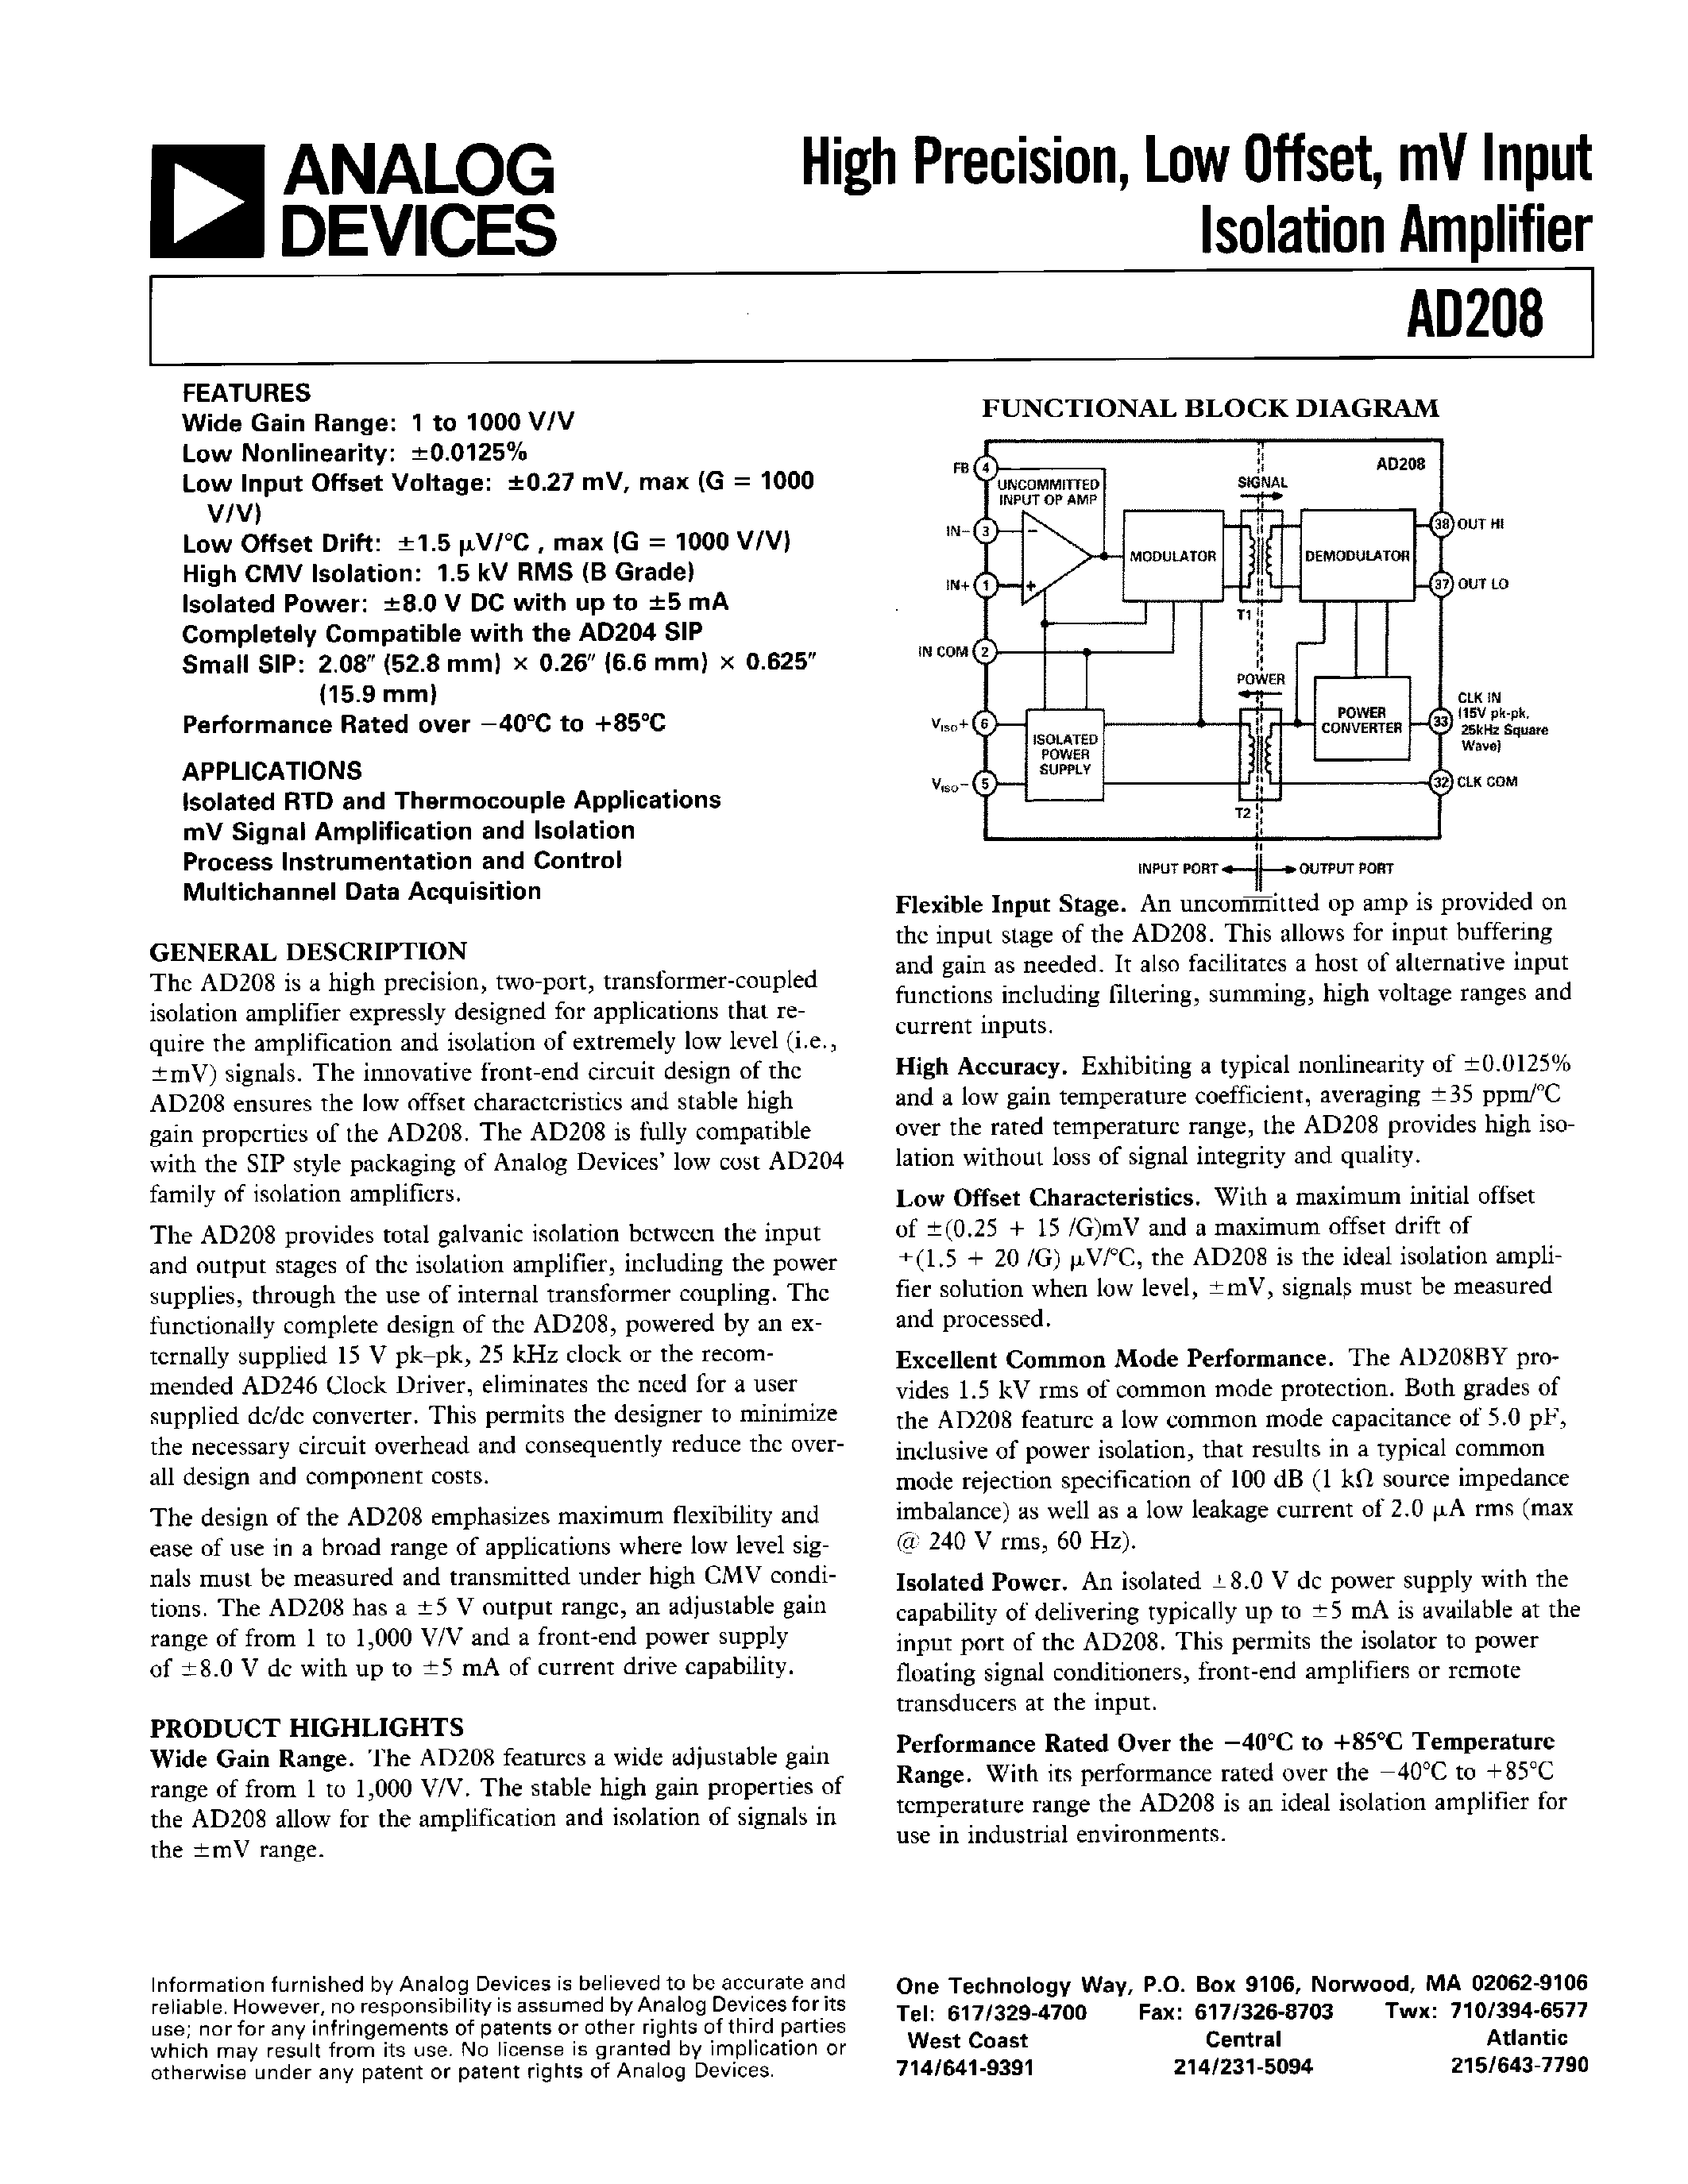 Datasheet AD208AY - High Precision/ Low Offset/ mV Input Isolation Amplifier page 1